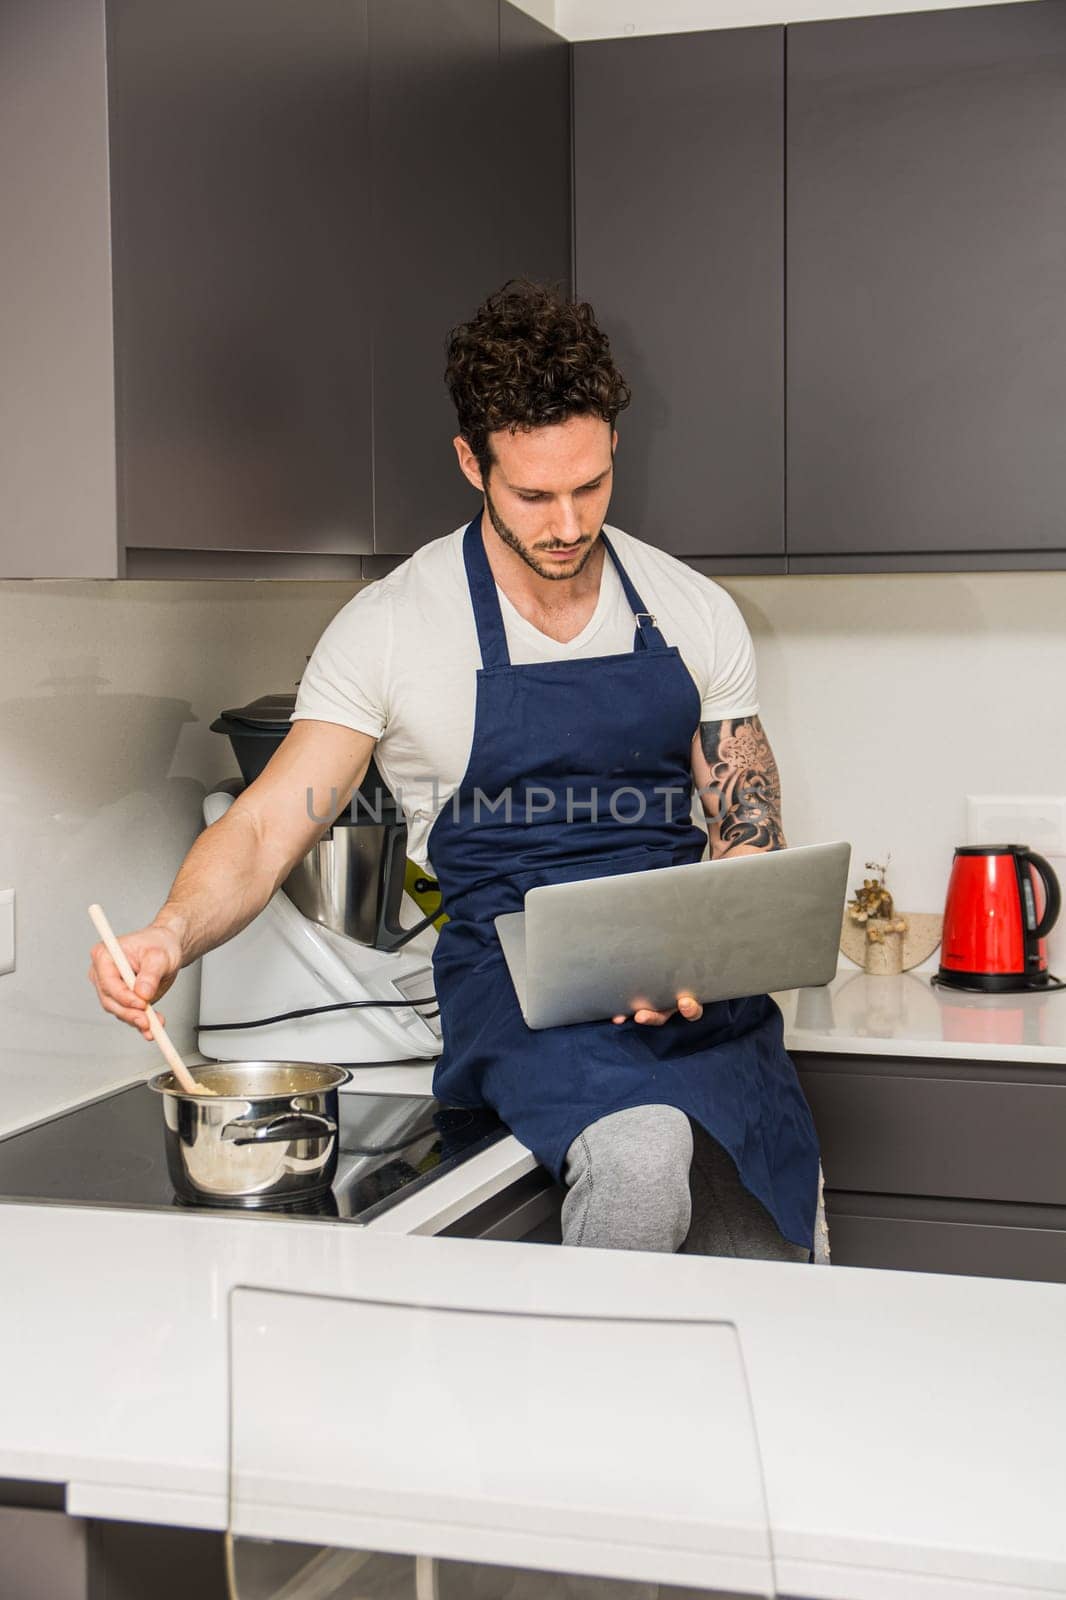 A Handsome, Muscular Man Sitting on a Kitchen Counter with a Laptop by artofphoto